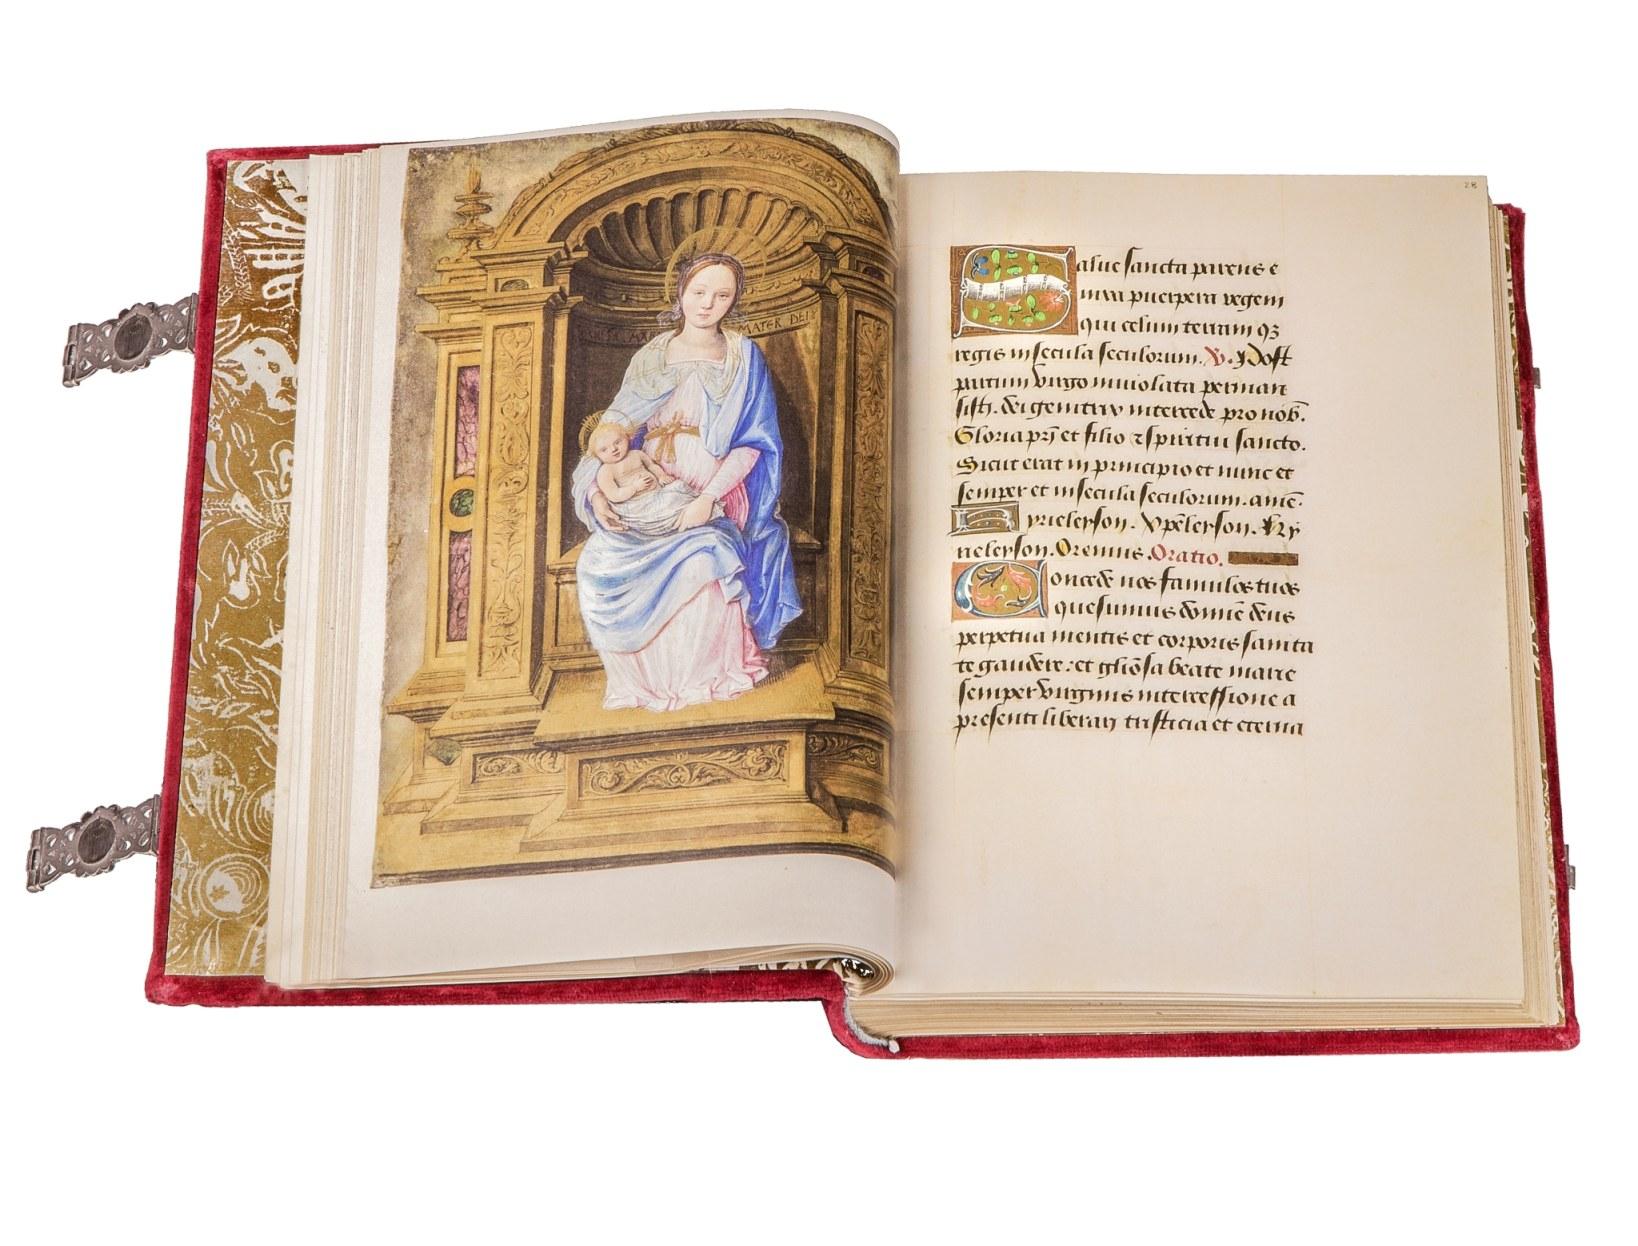 Contemporary Book of Hours of Henry VIII - One-time only limited-edition facsimile  For Sale